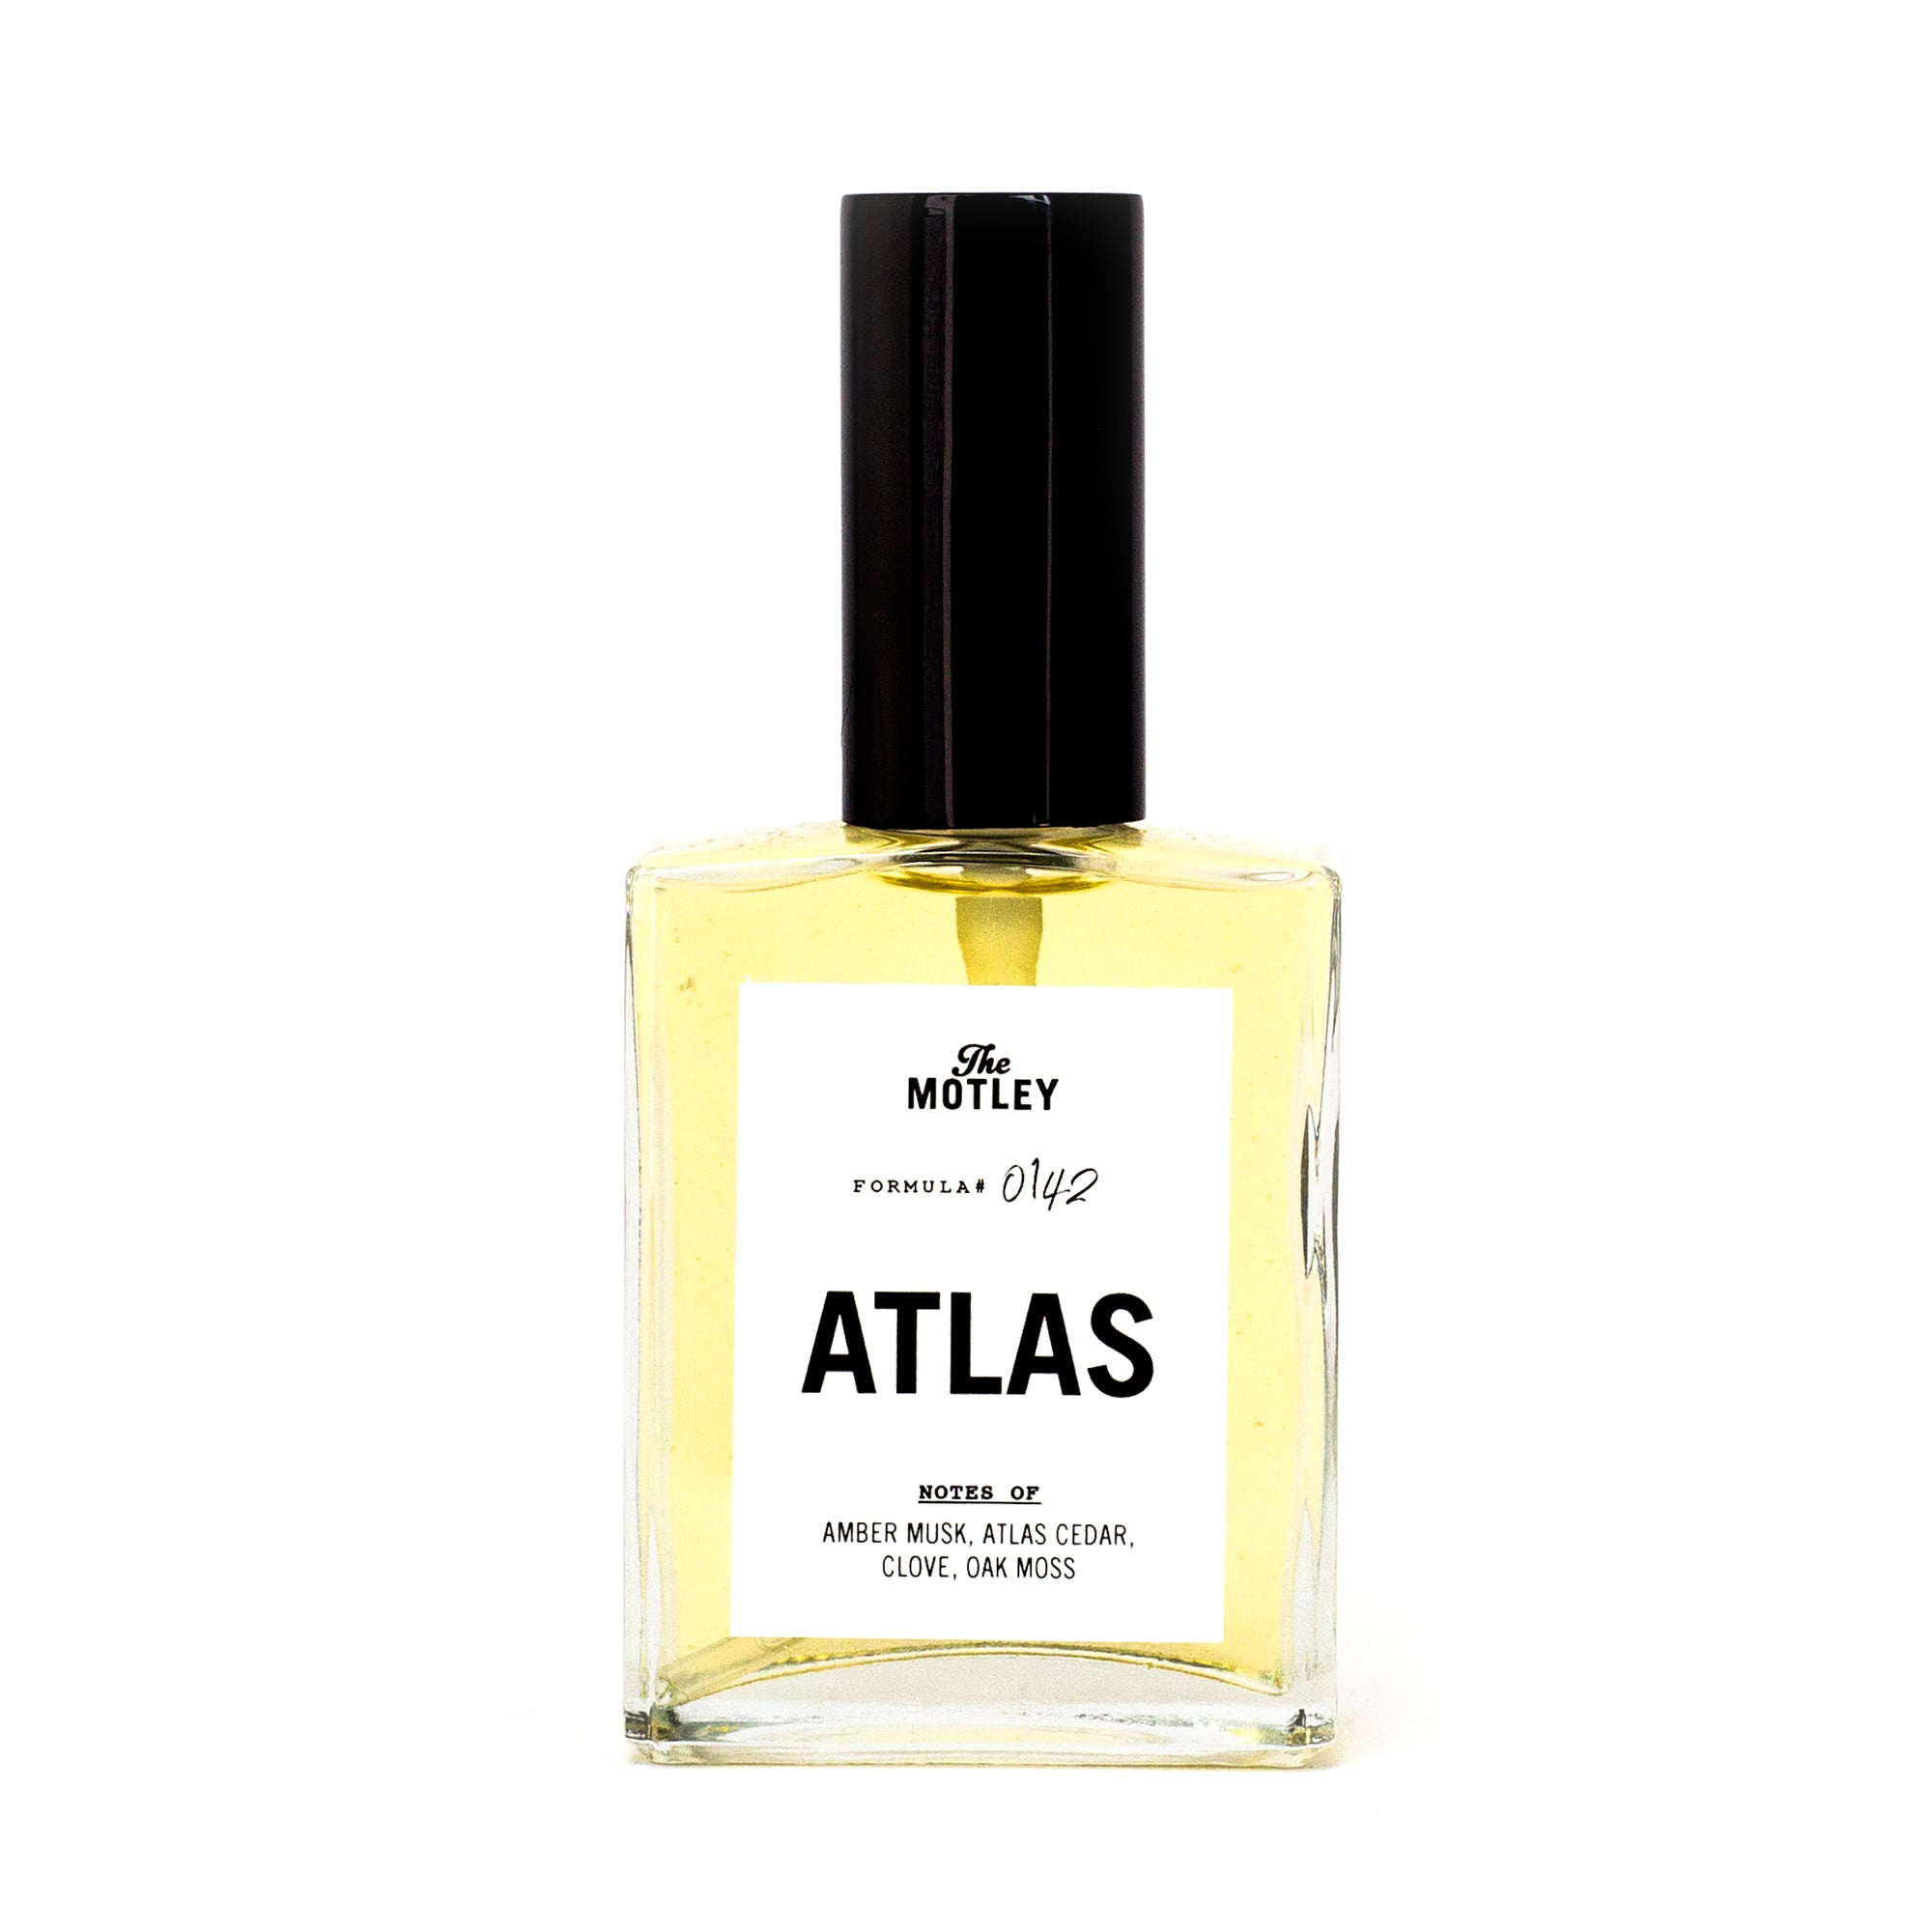 The Motley Atlas Fragrance in a glass bottle with gold liquid and a black pump cap against a white background.